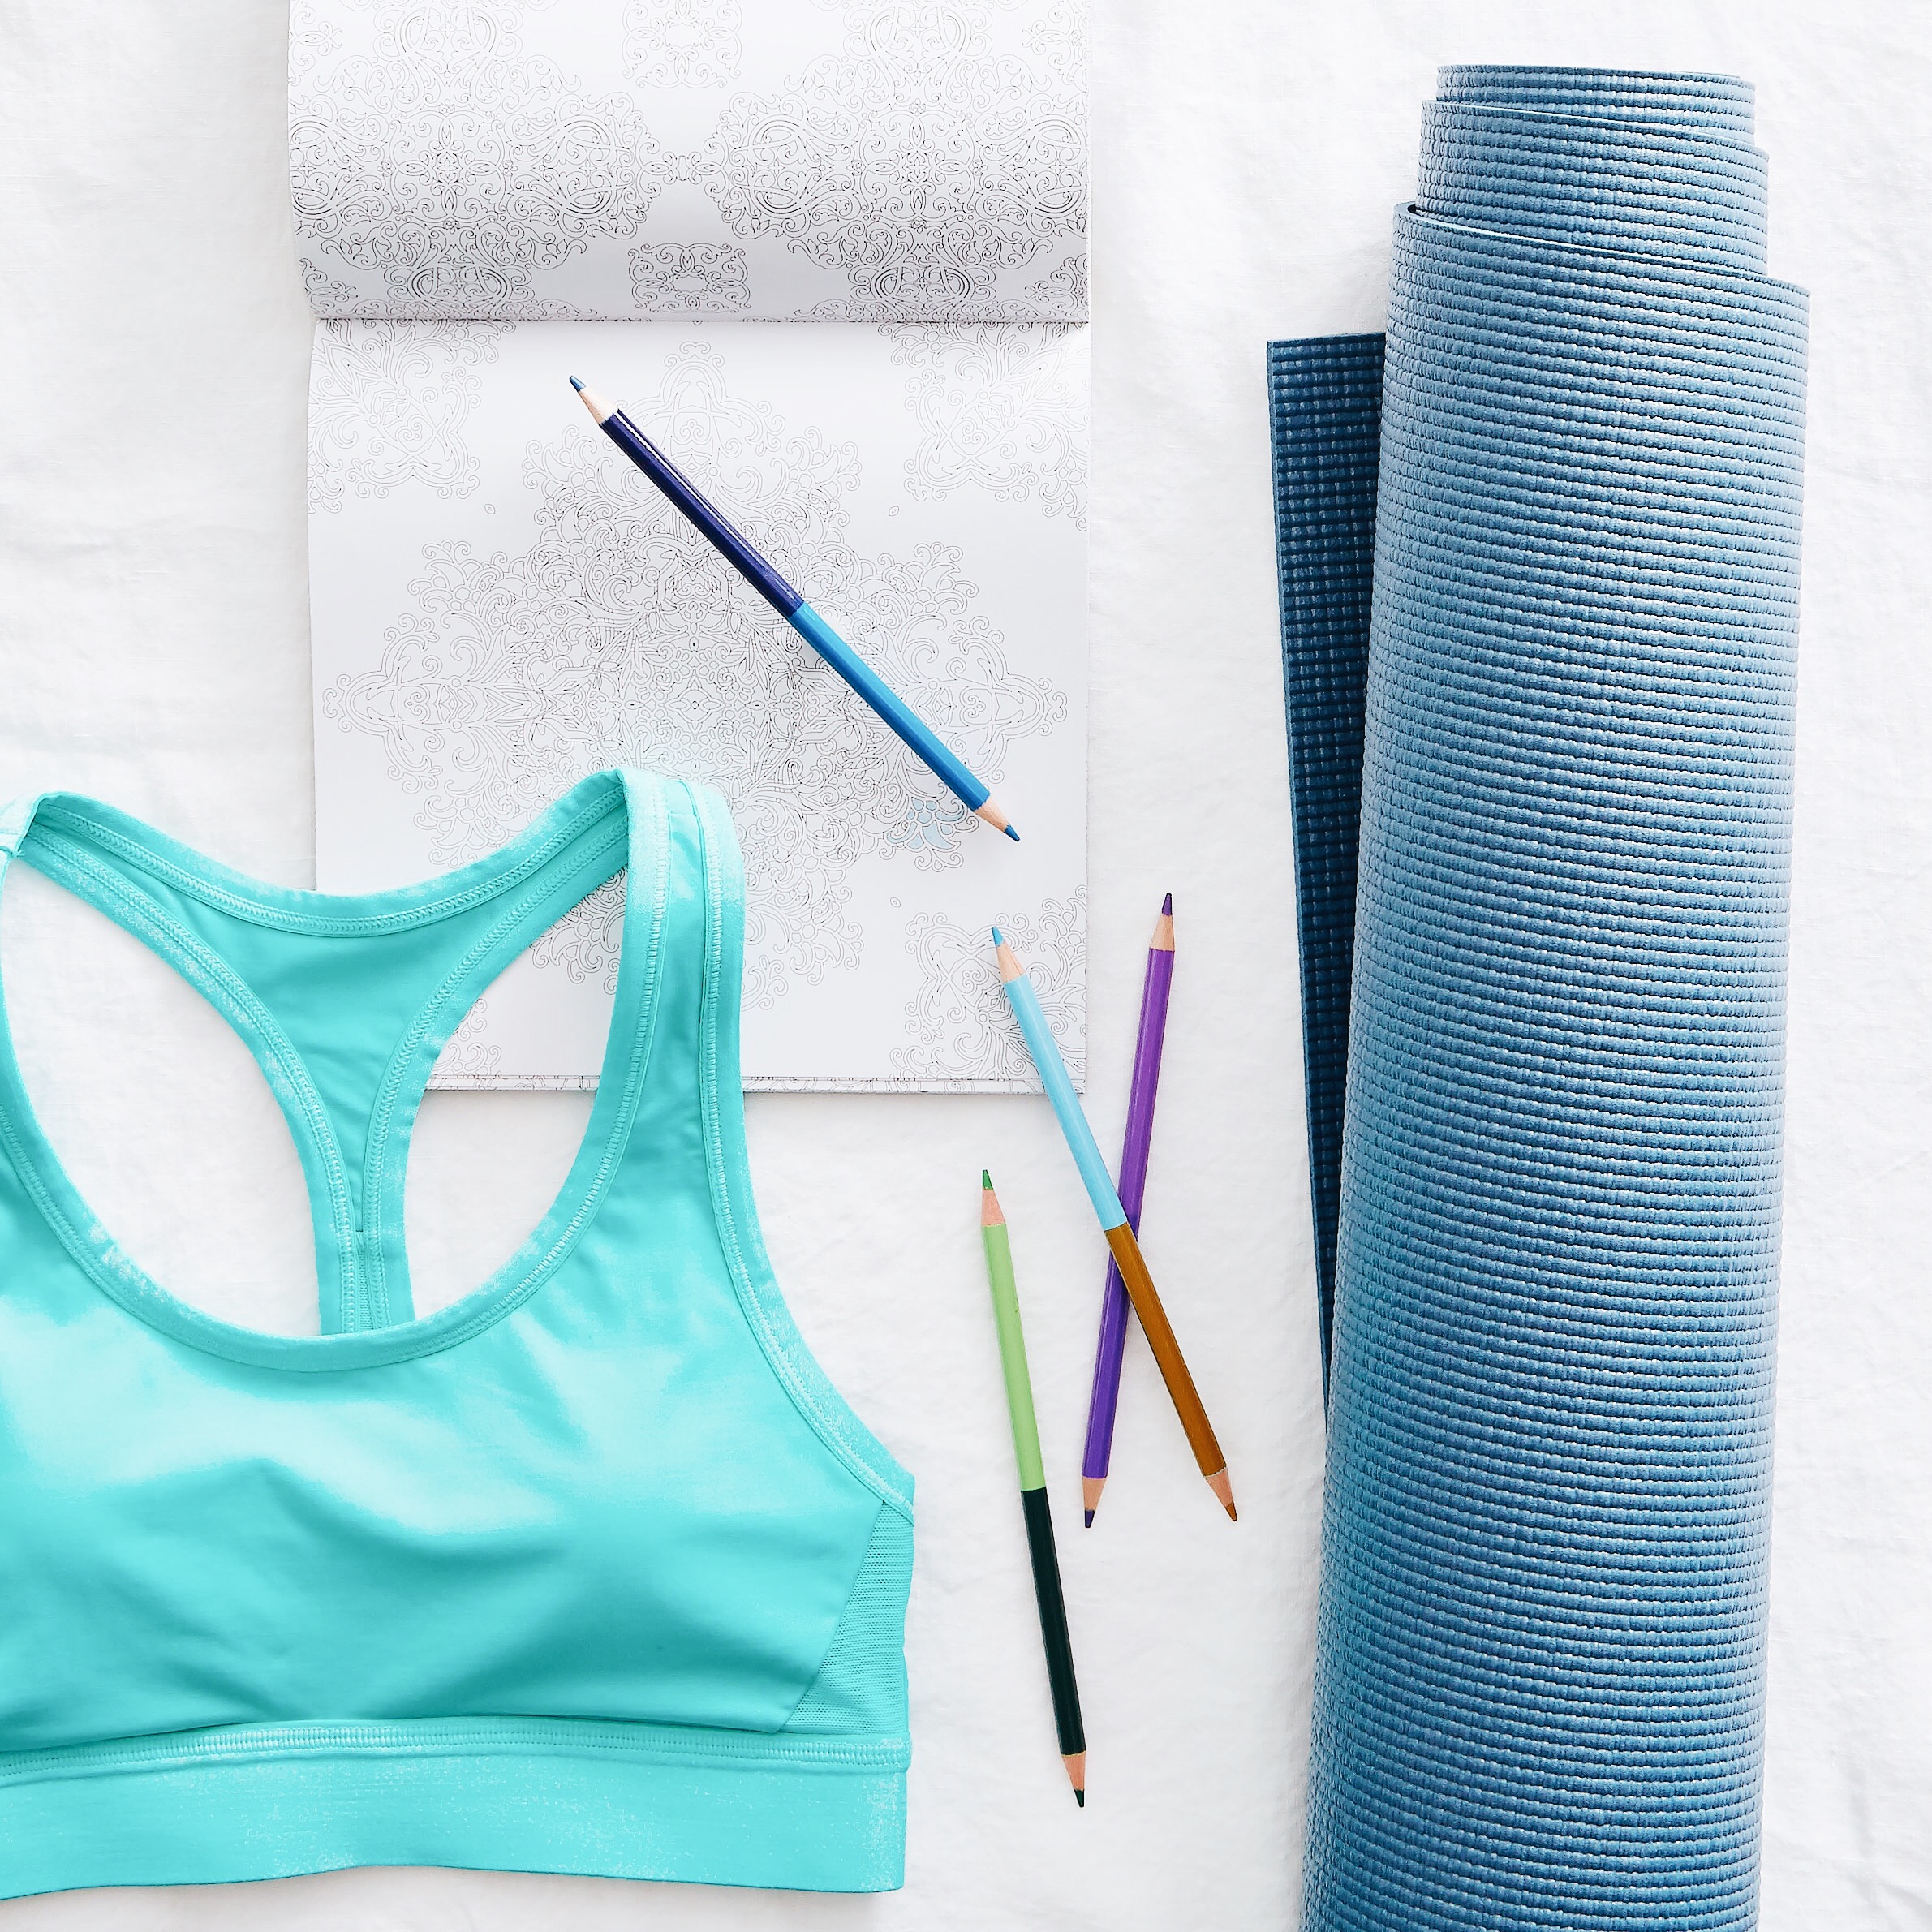 #AerieREAL Love From Iskra: Relax & De-Stress